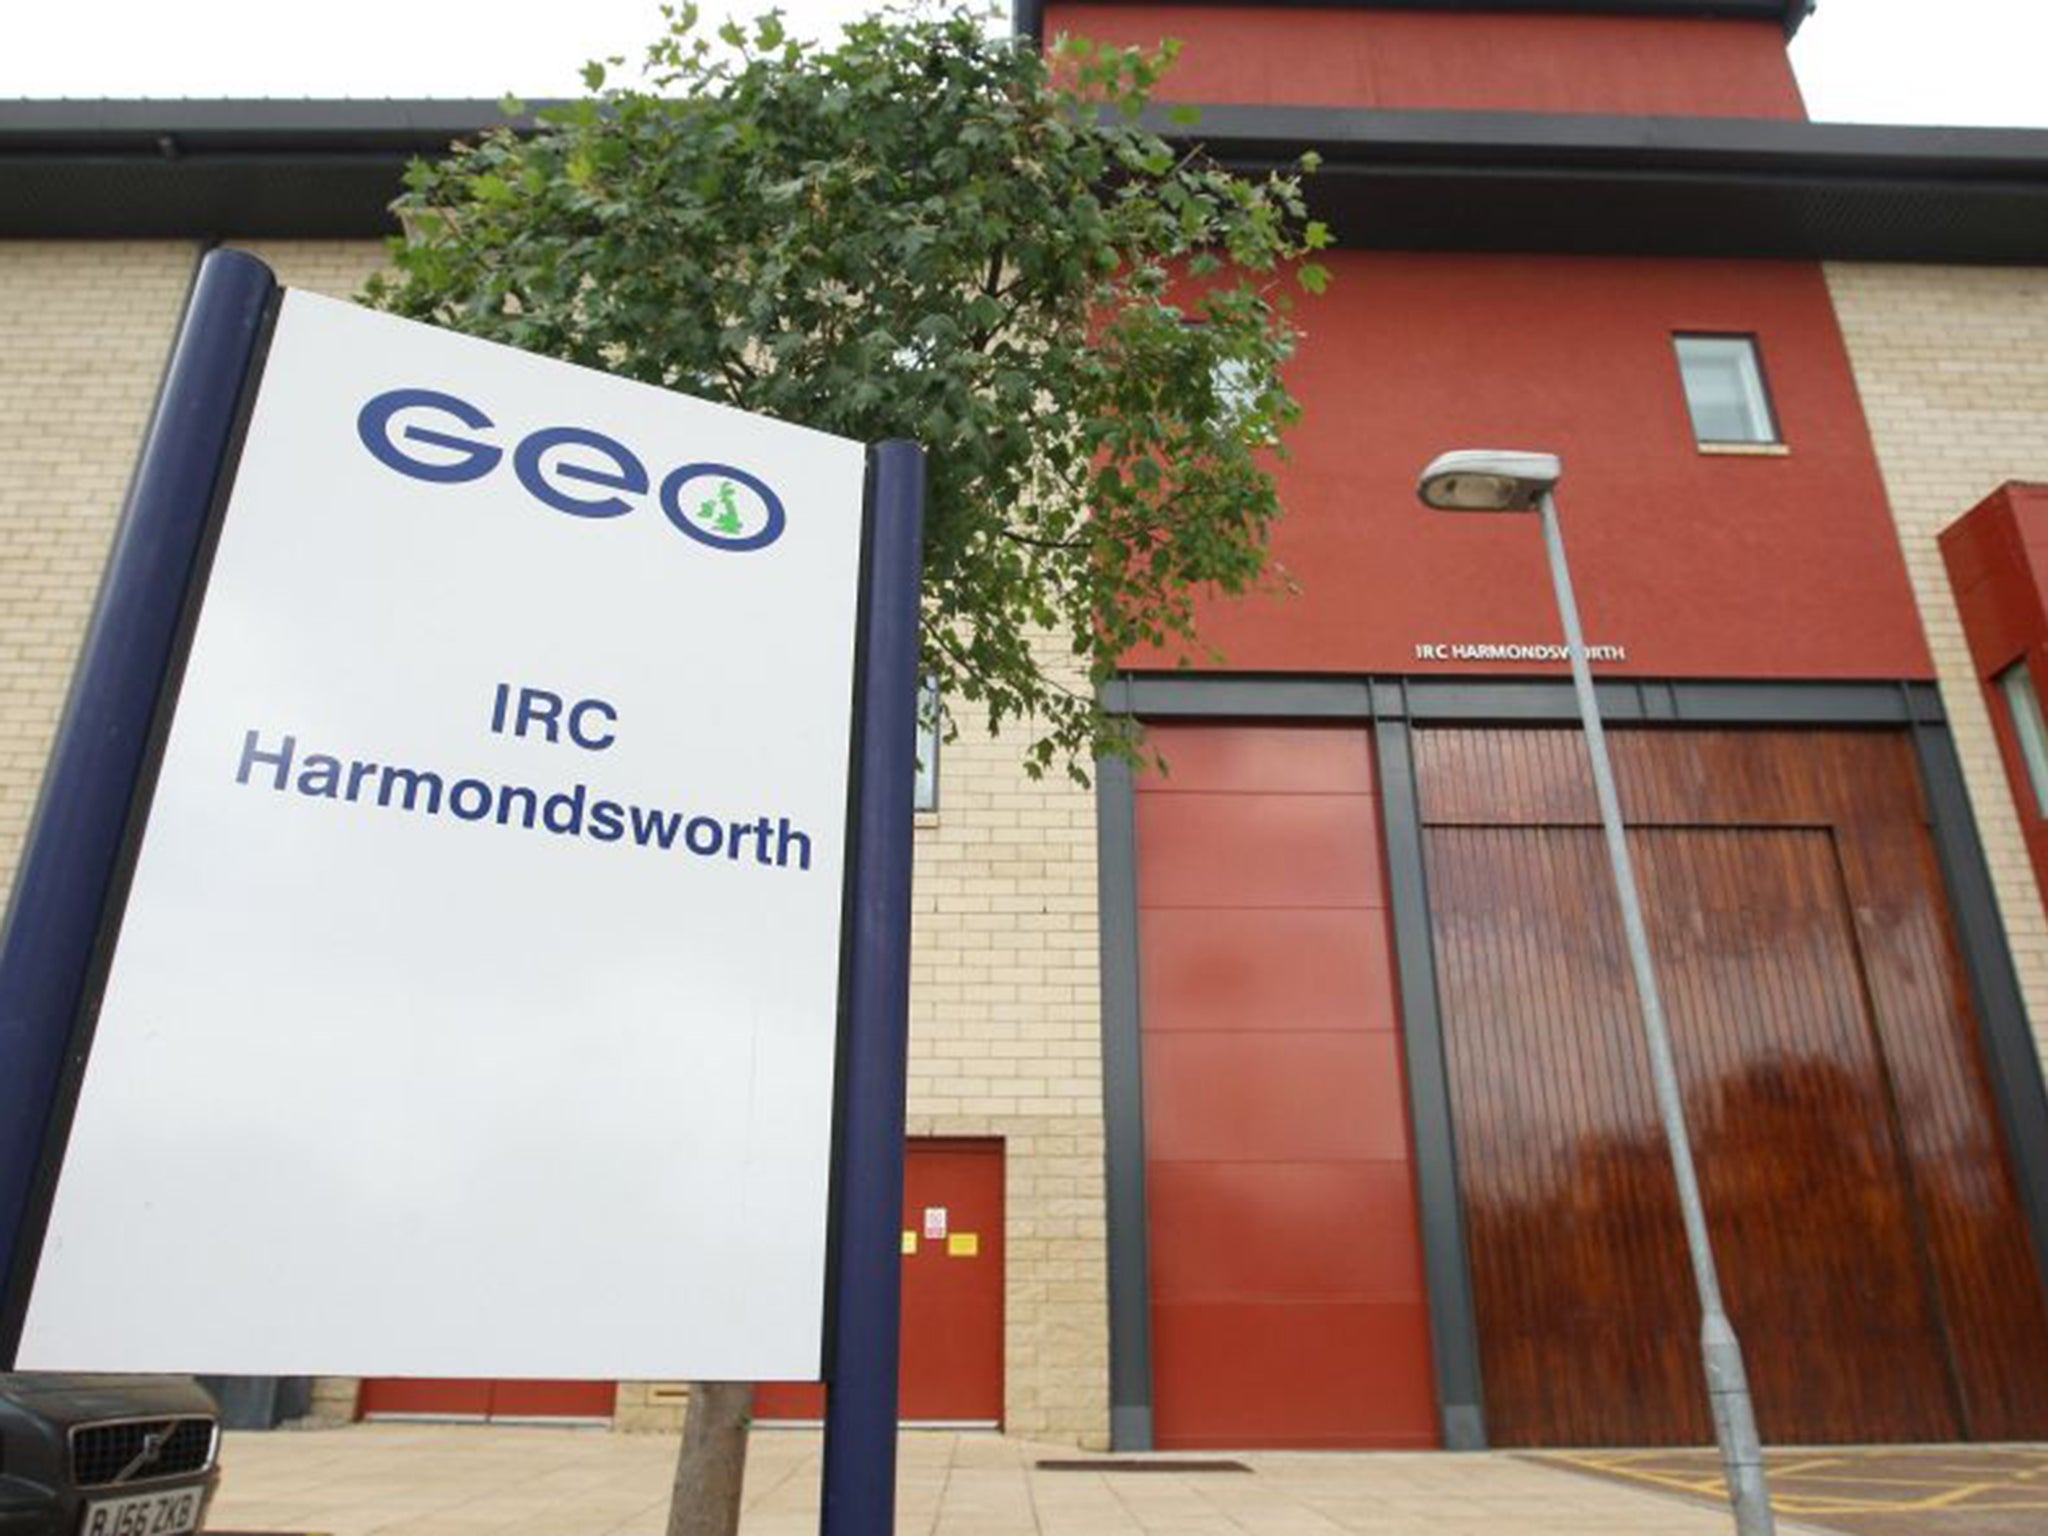 Harmondsworth Moor in London is the largest immigration detention centre in Europe